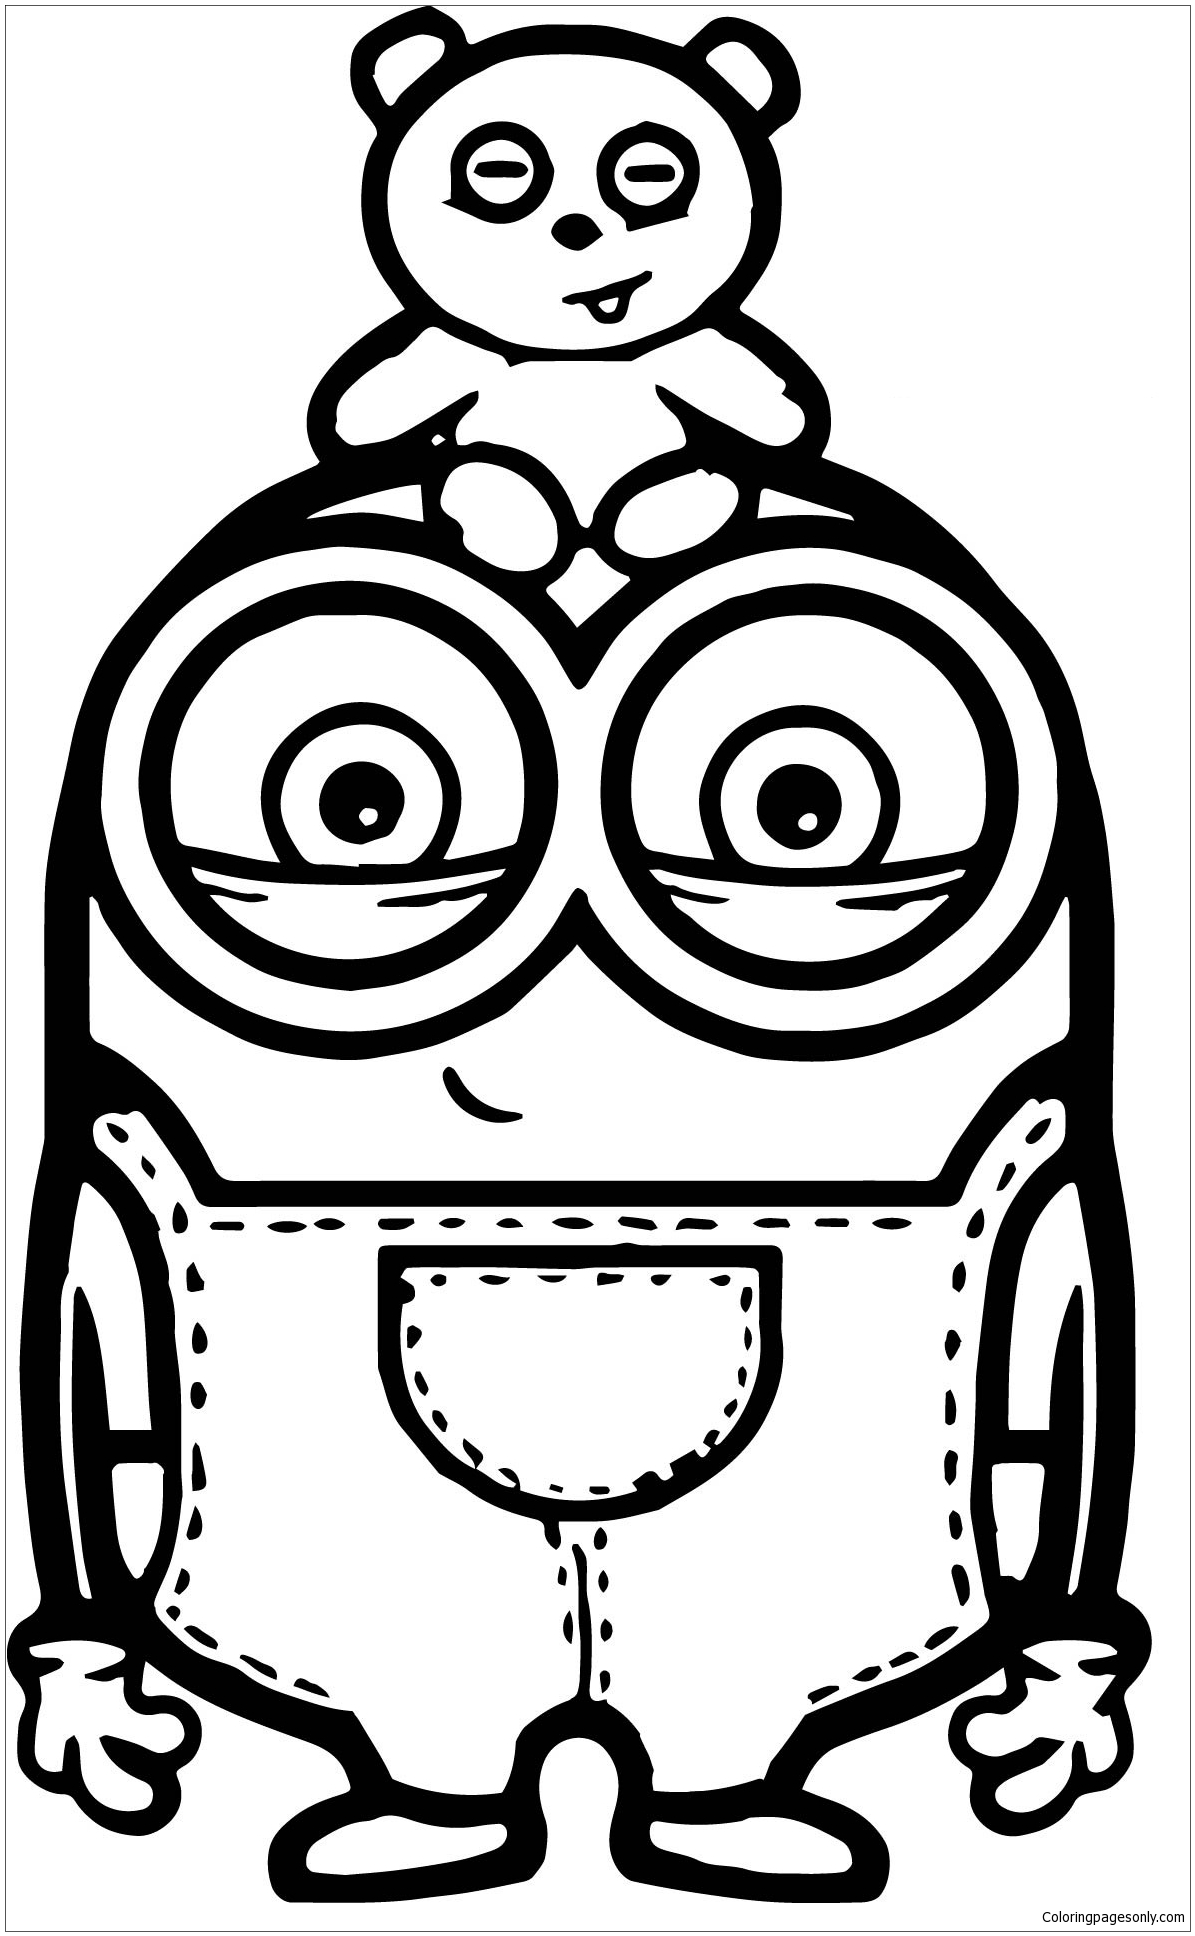 Cute Bob And Bear Minions Coloring Page - Free Coloring Pages Online